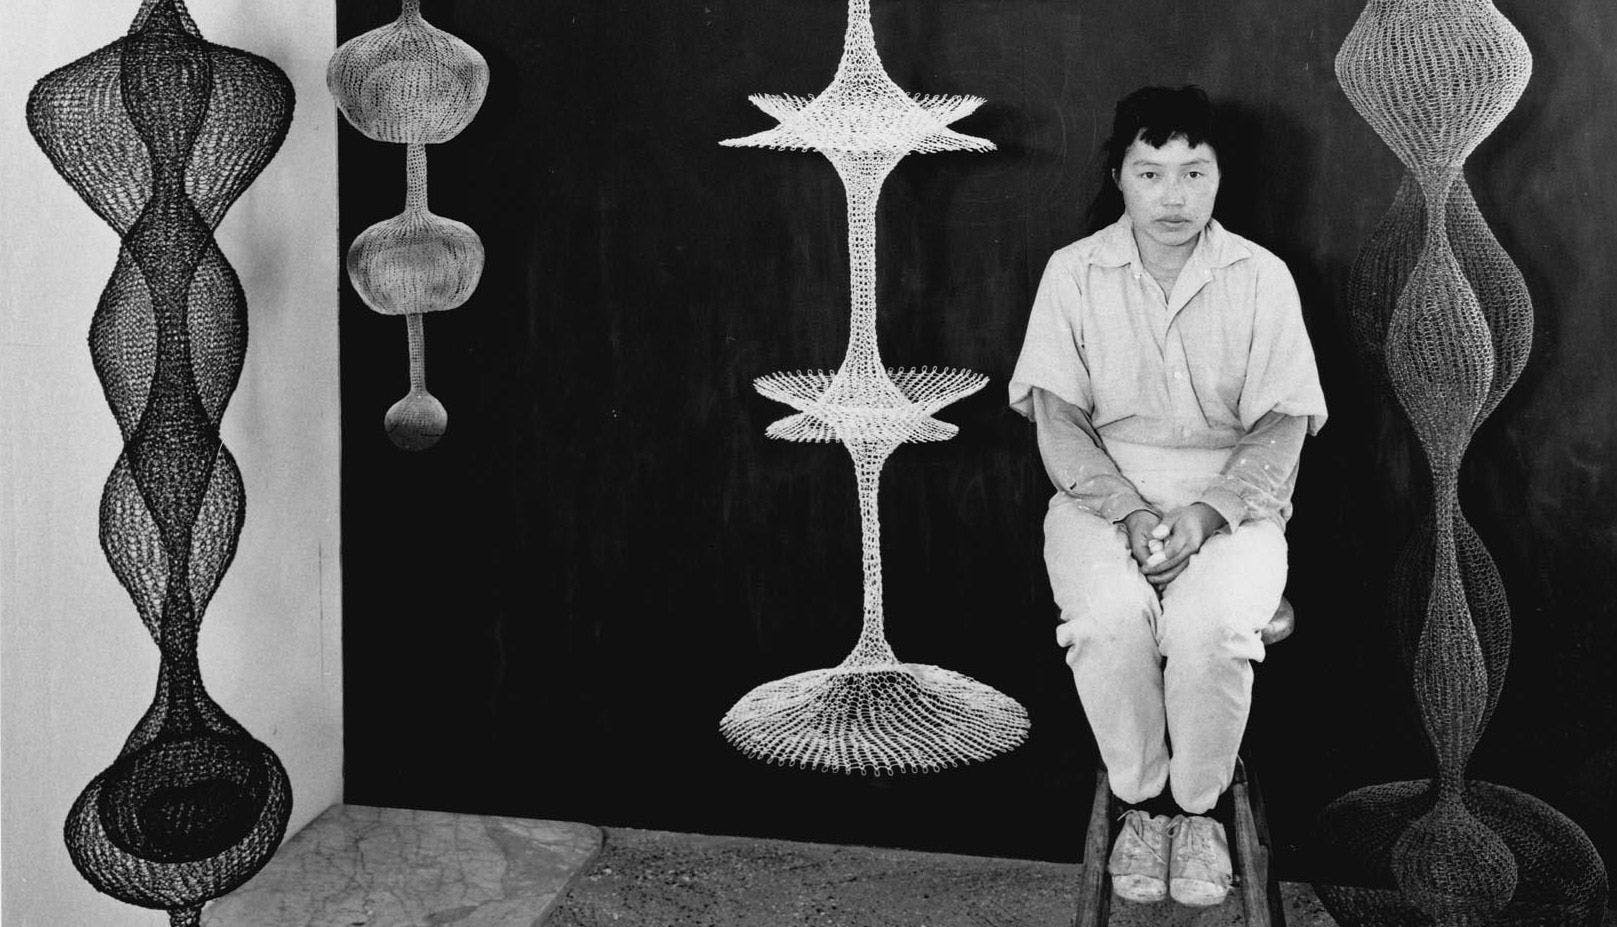 A photo of Ruth Asawa in her studio, dated 1956. Photo by Paul Hassel.